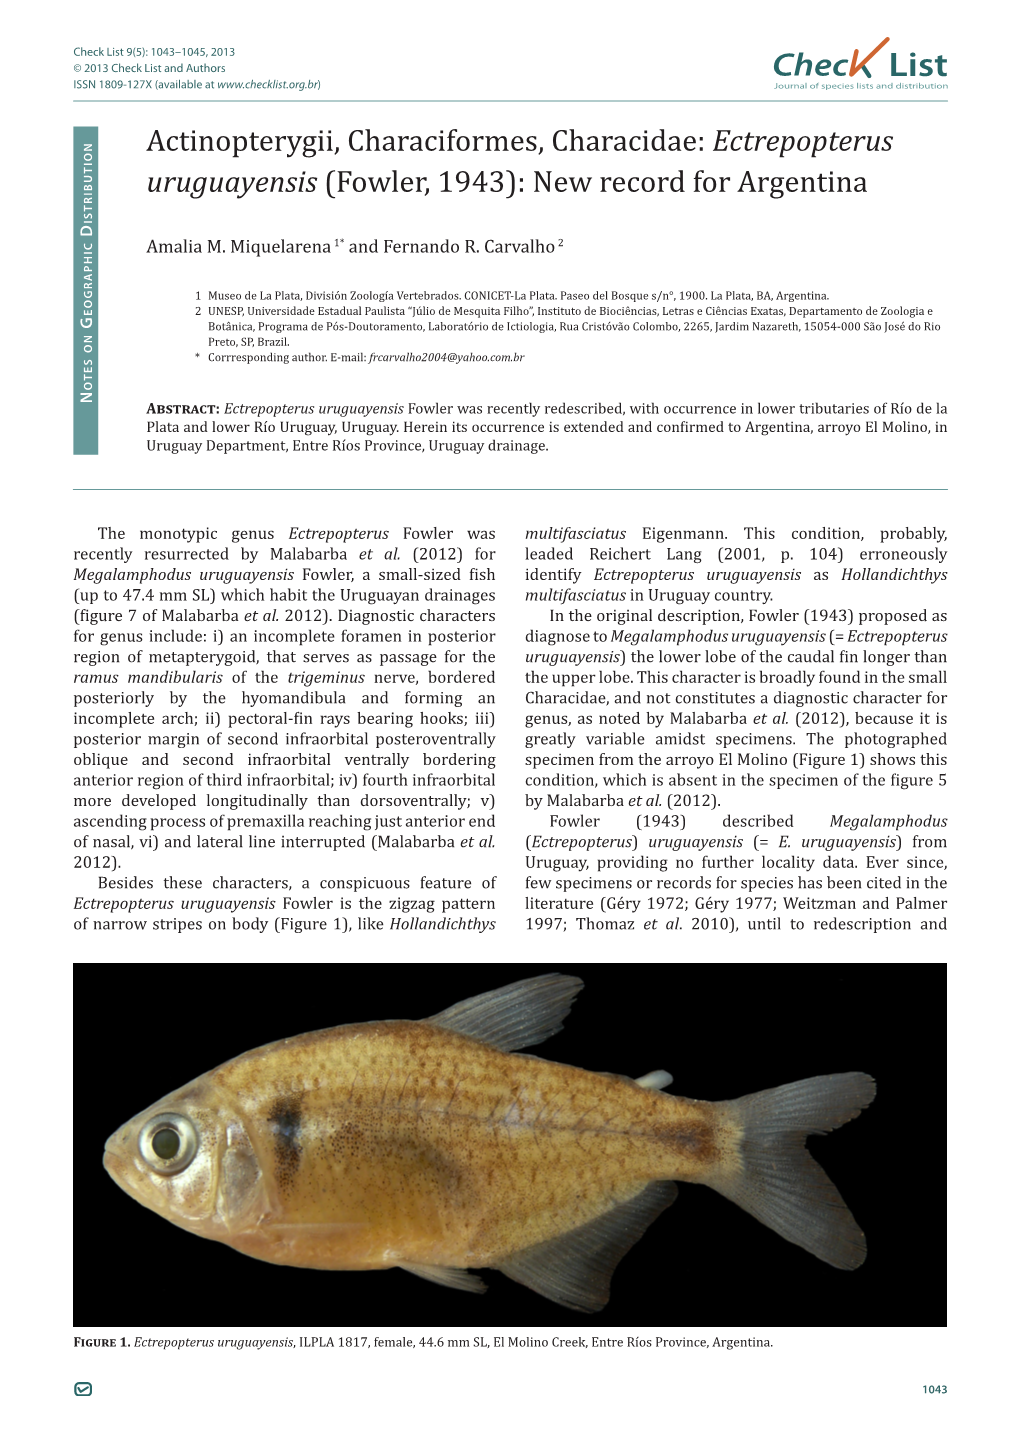 Ectrepopterus Uruguayensis (Fowler, 1943): New Record for Argentina